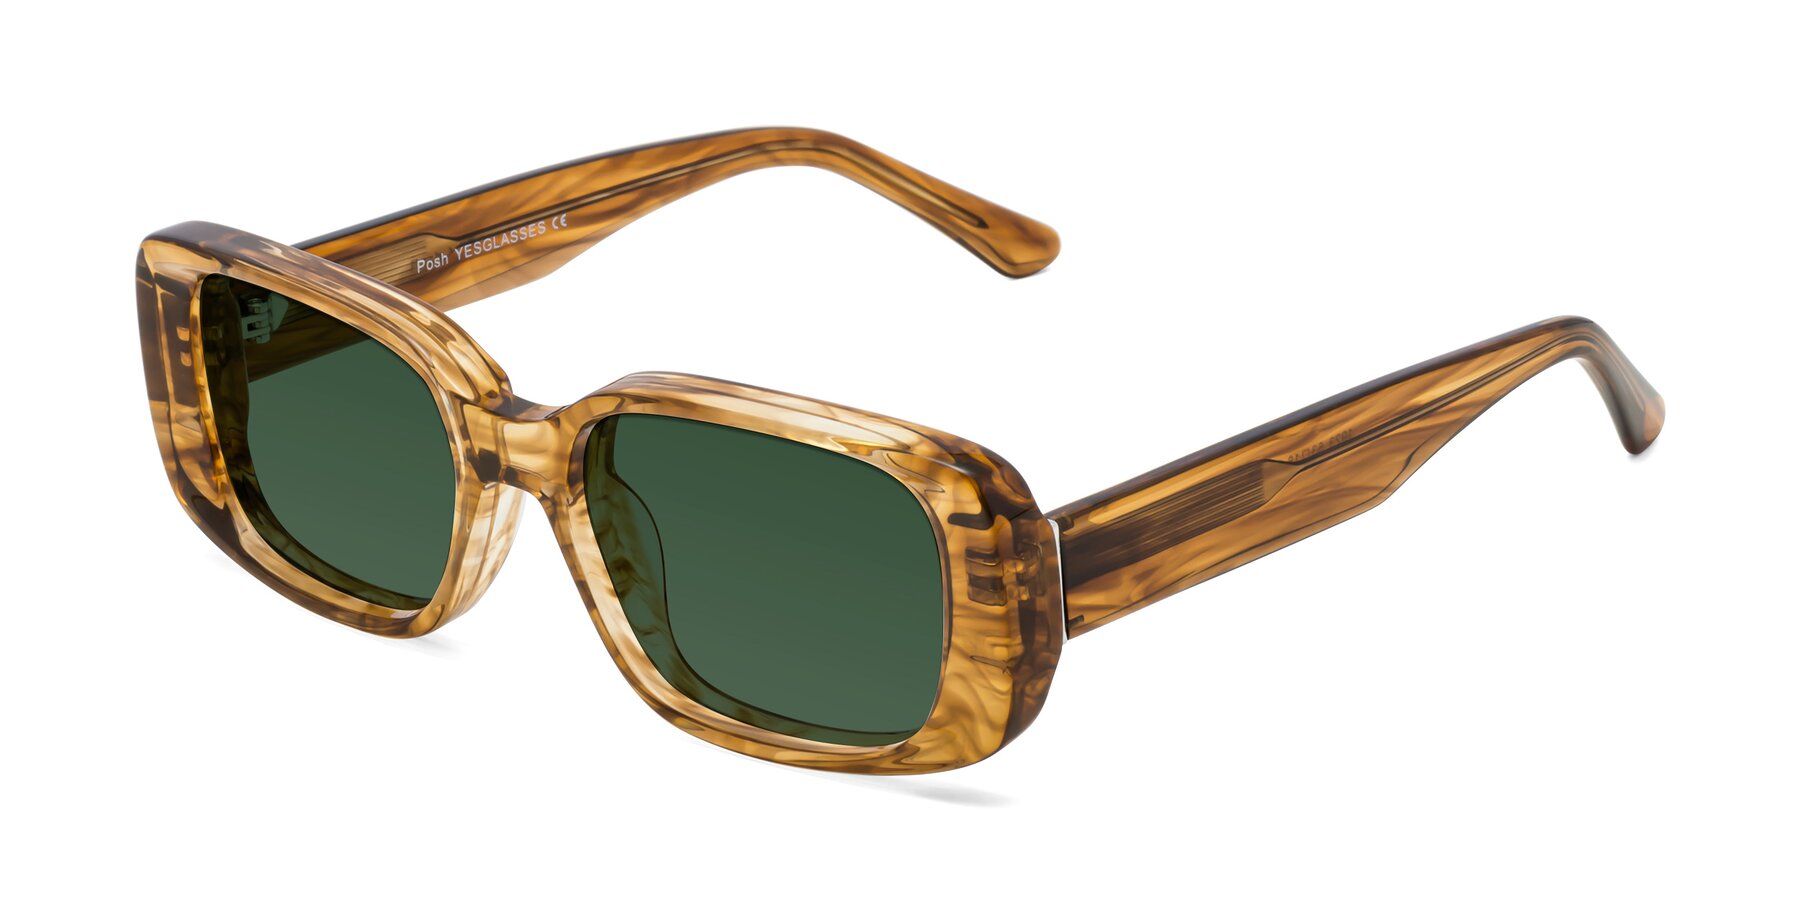 Angle of Posh in Stripe Amber with Green Tinted Lenses